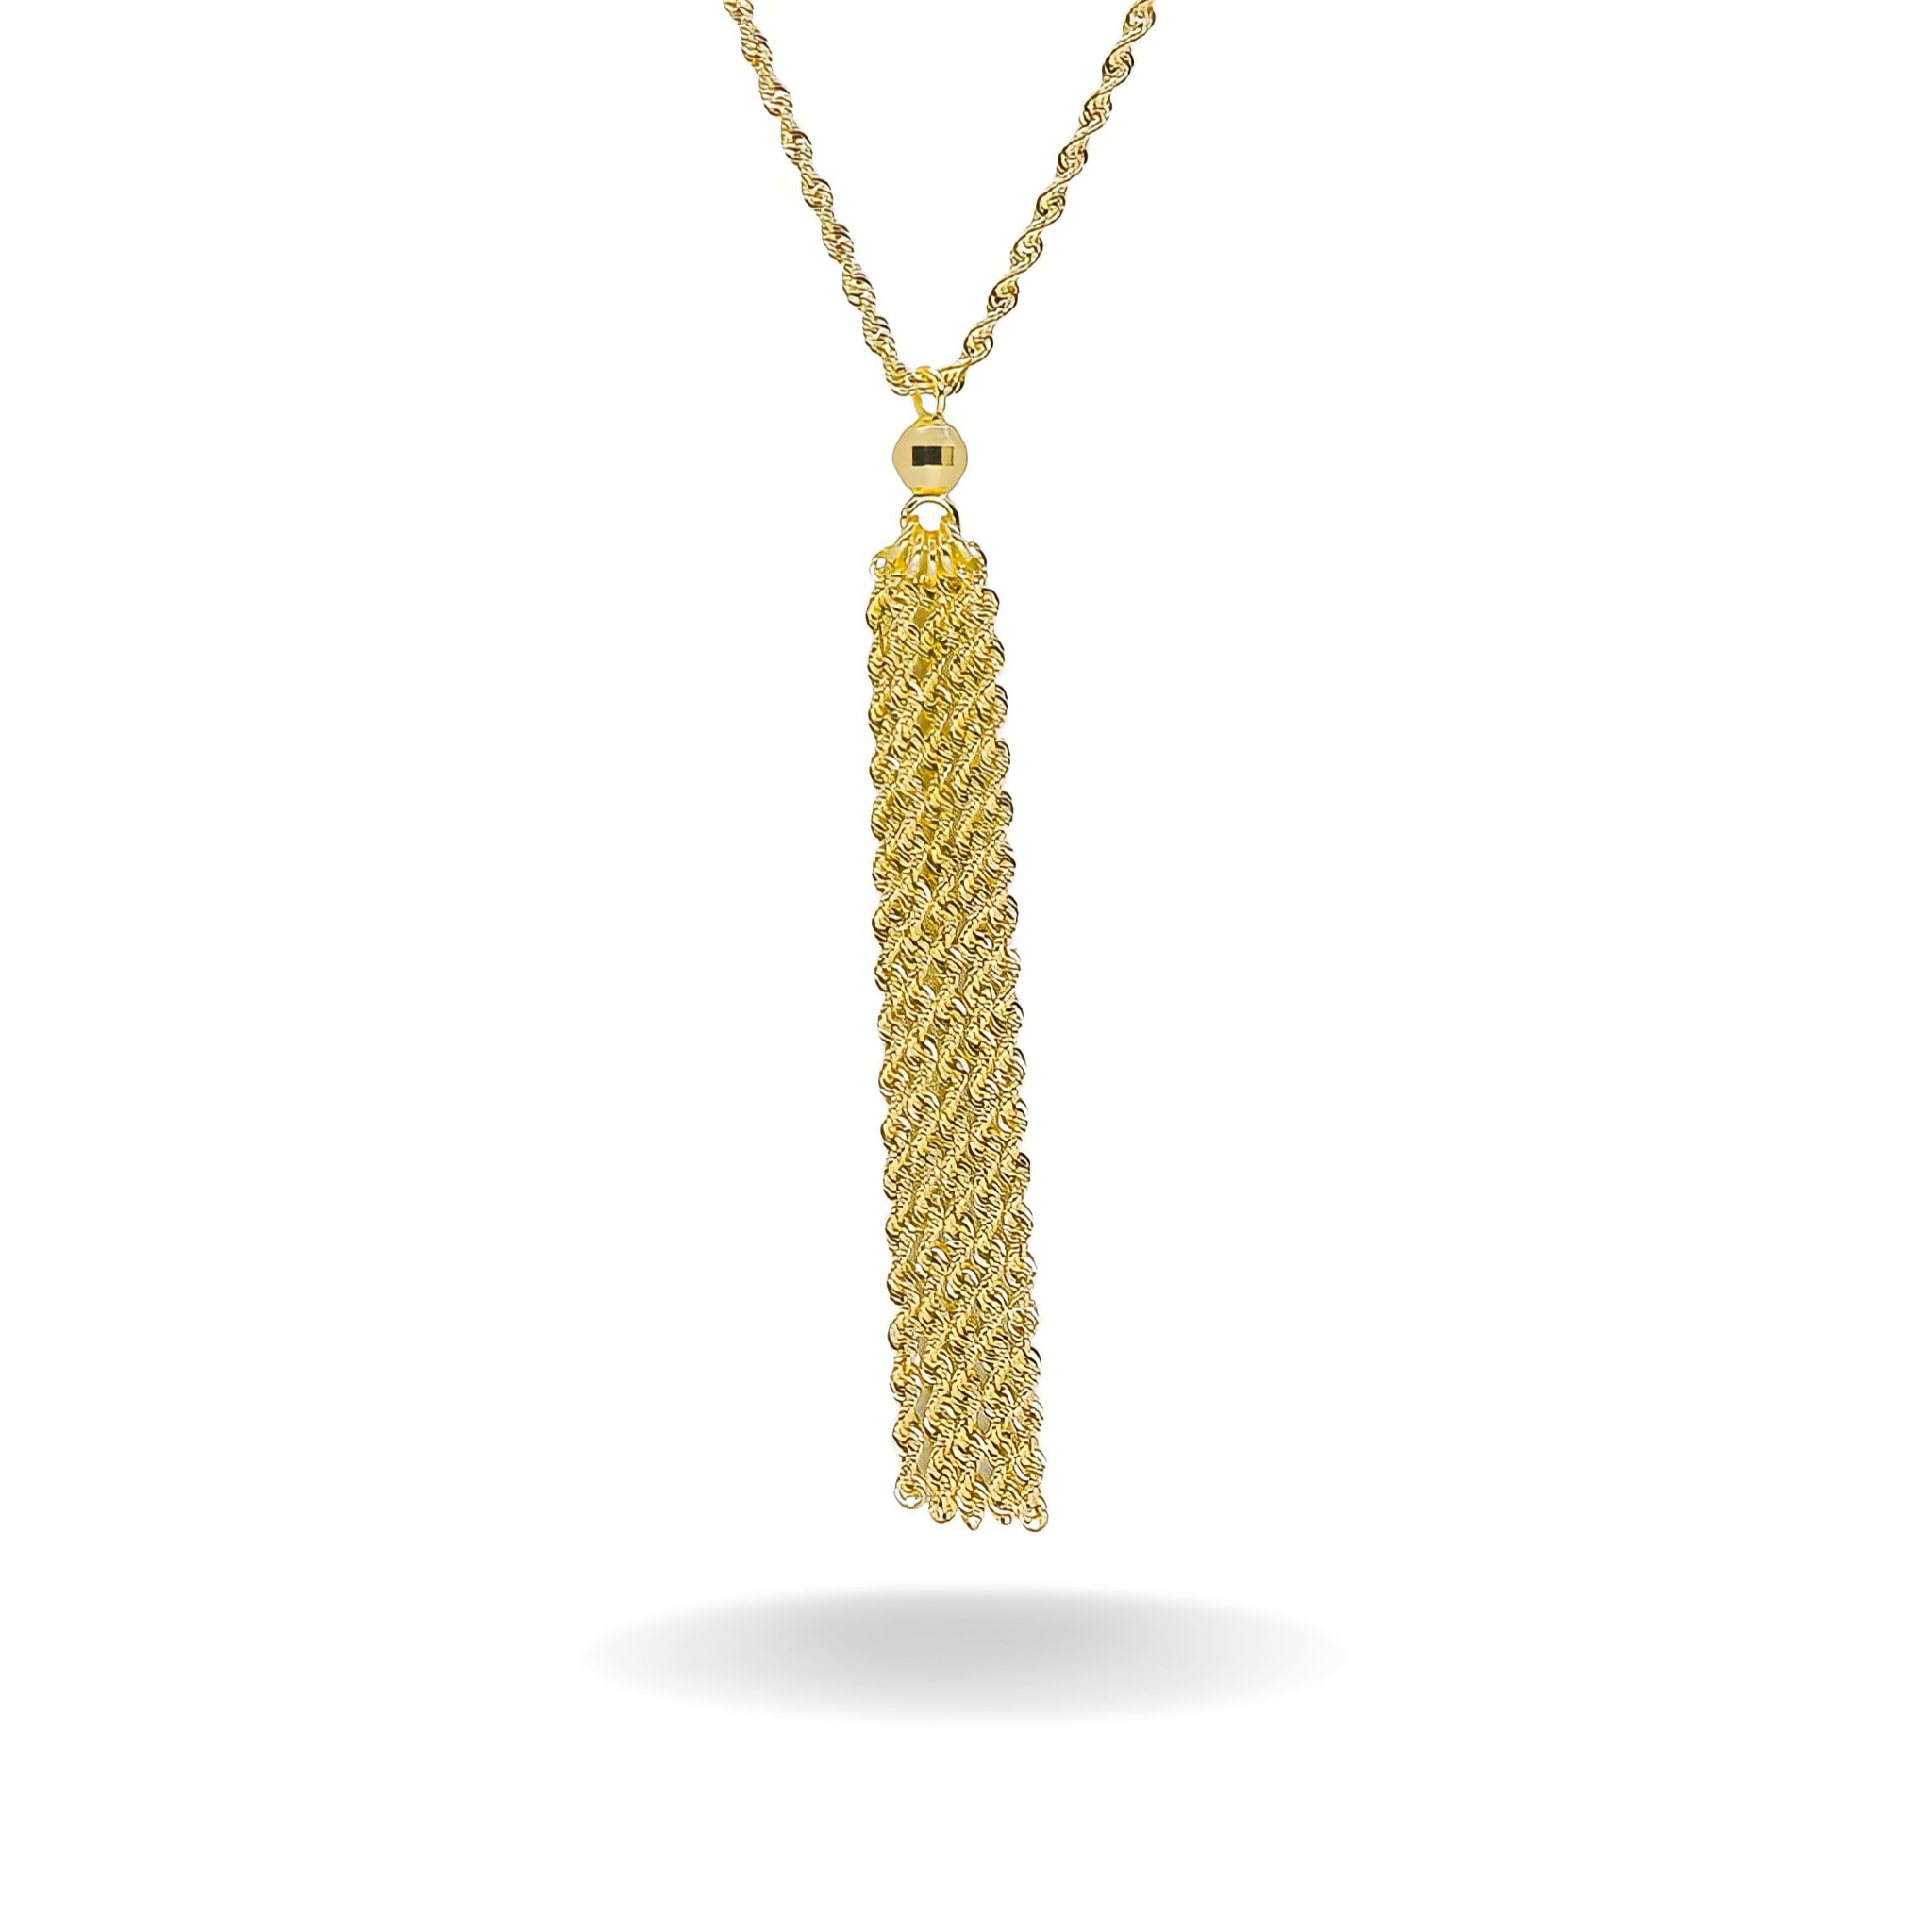 14K YELLOW GOLD ROPE TASSLE LARIAT NECKLACE